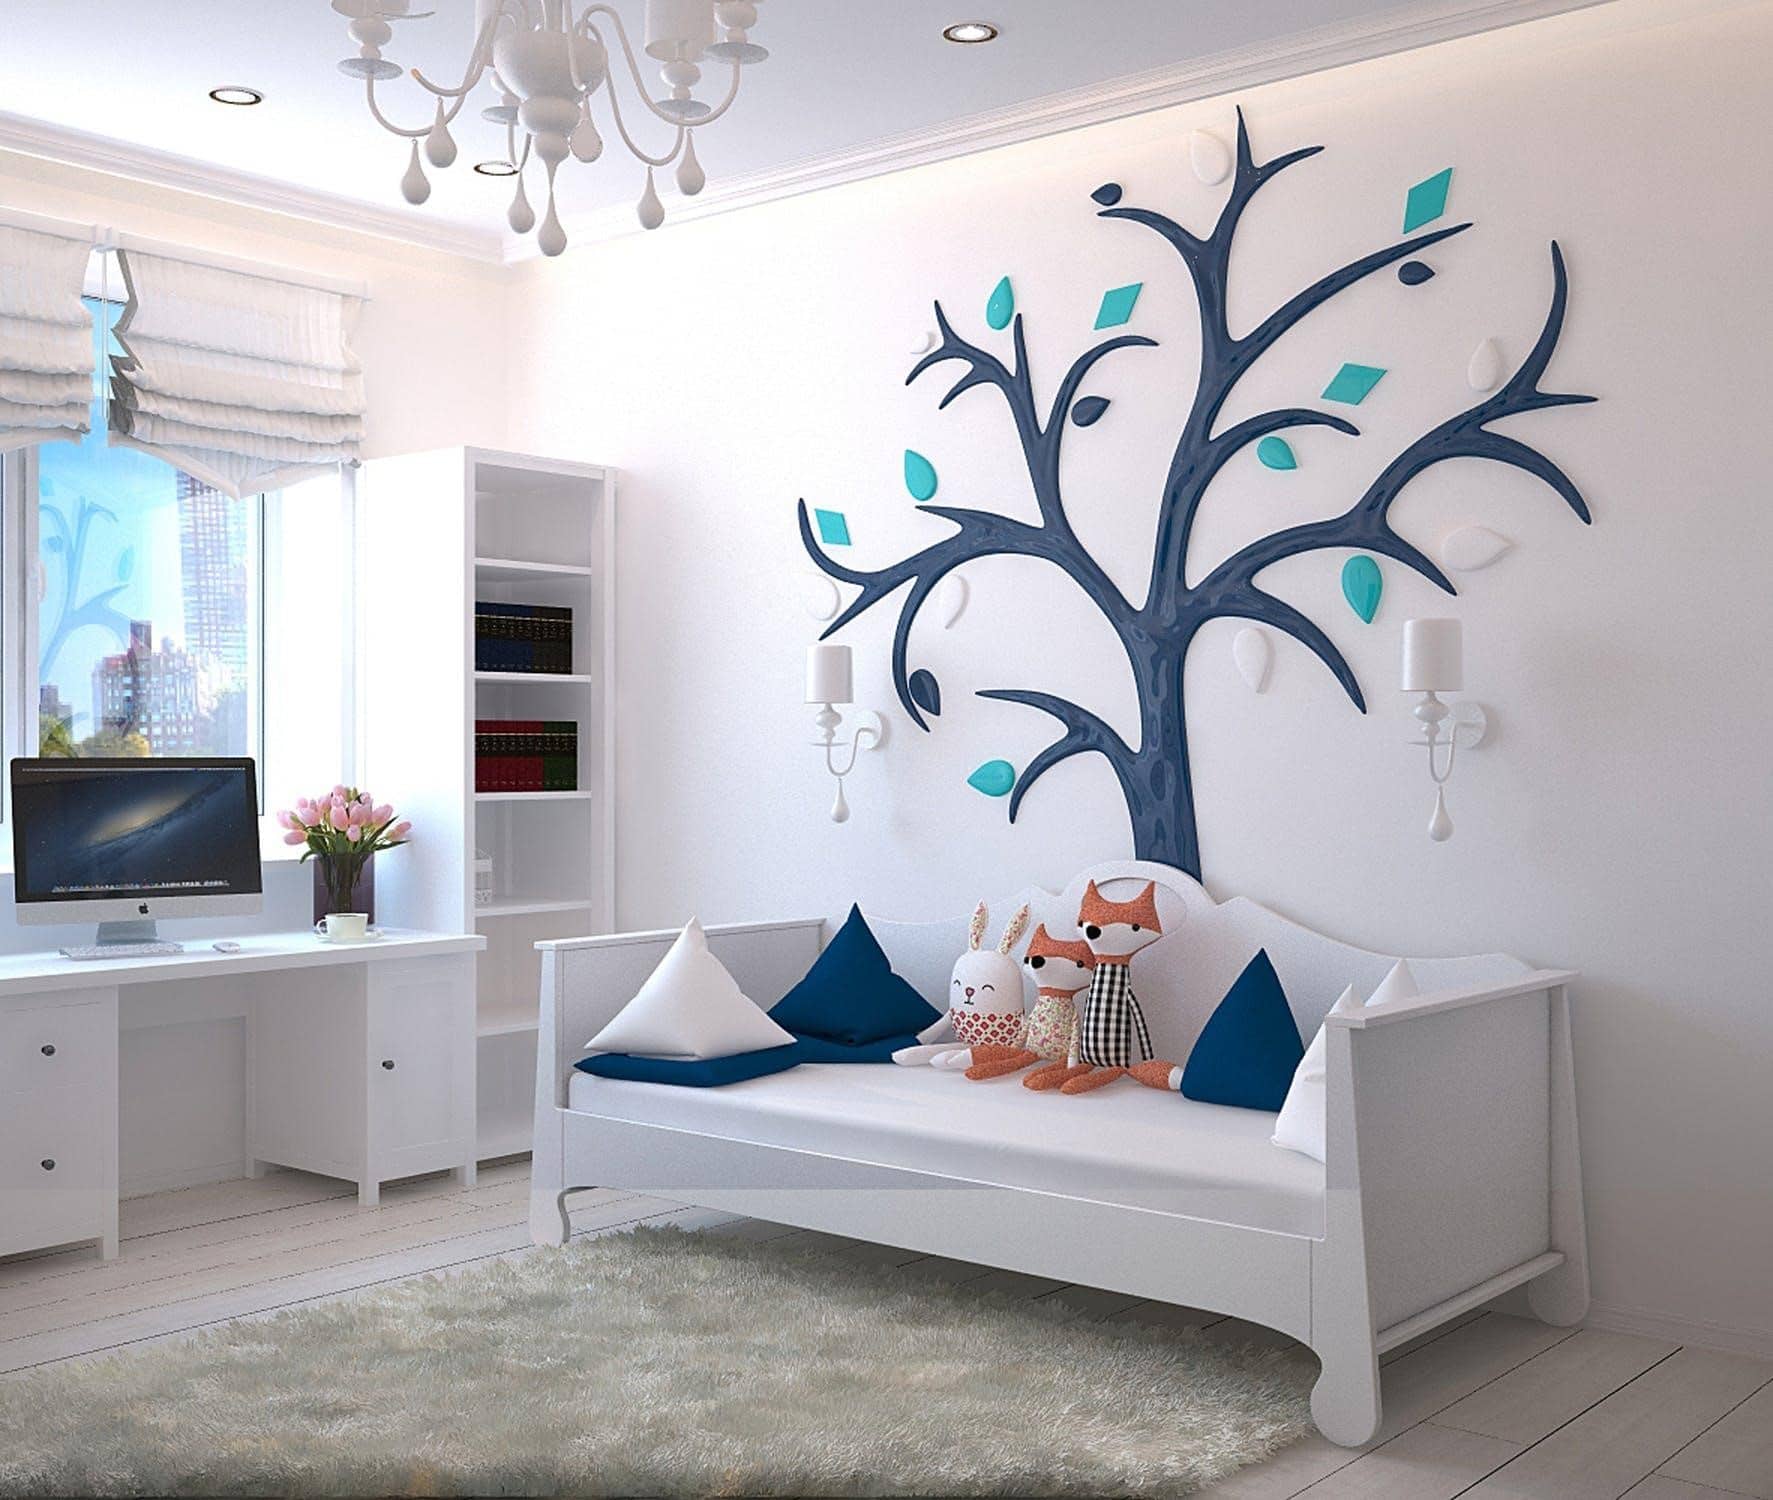 Designing a kids' room from start to finish, Source: Lara Douglas from Neon Signs Depot